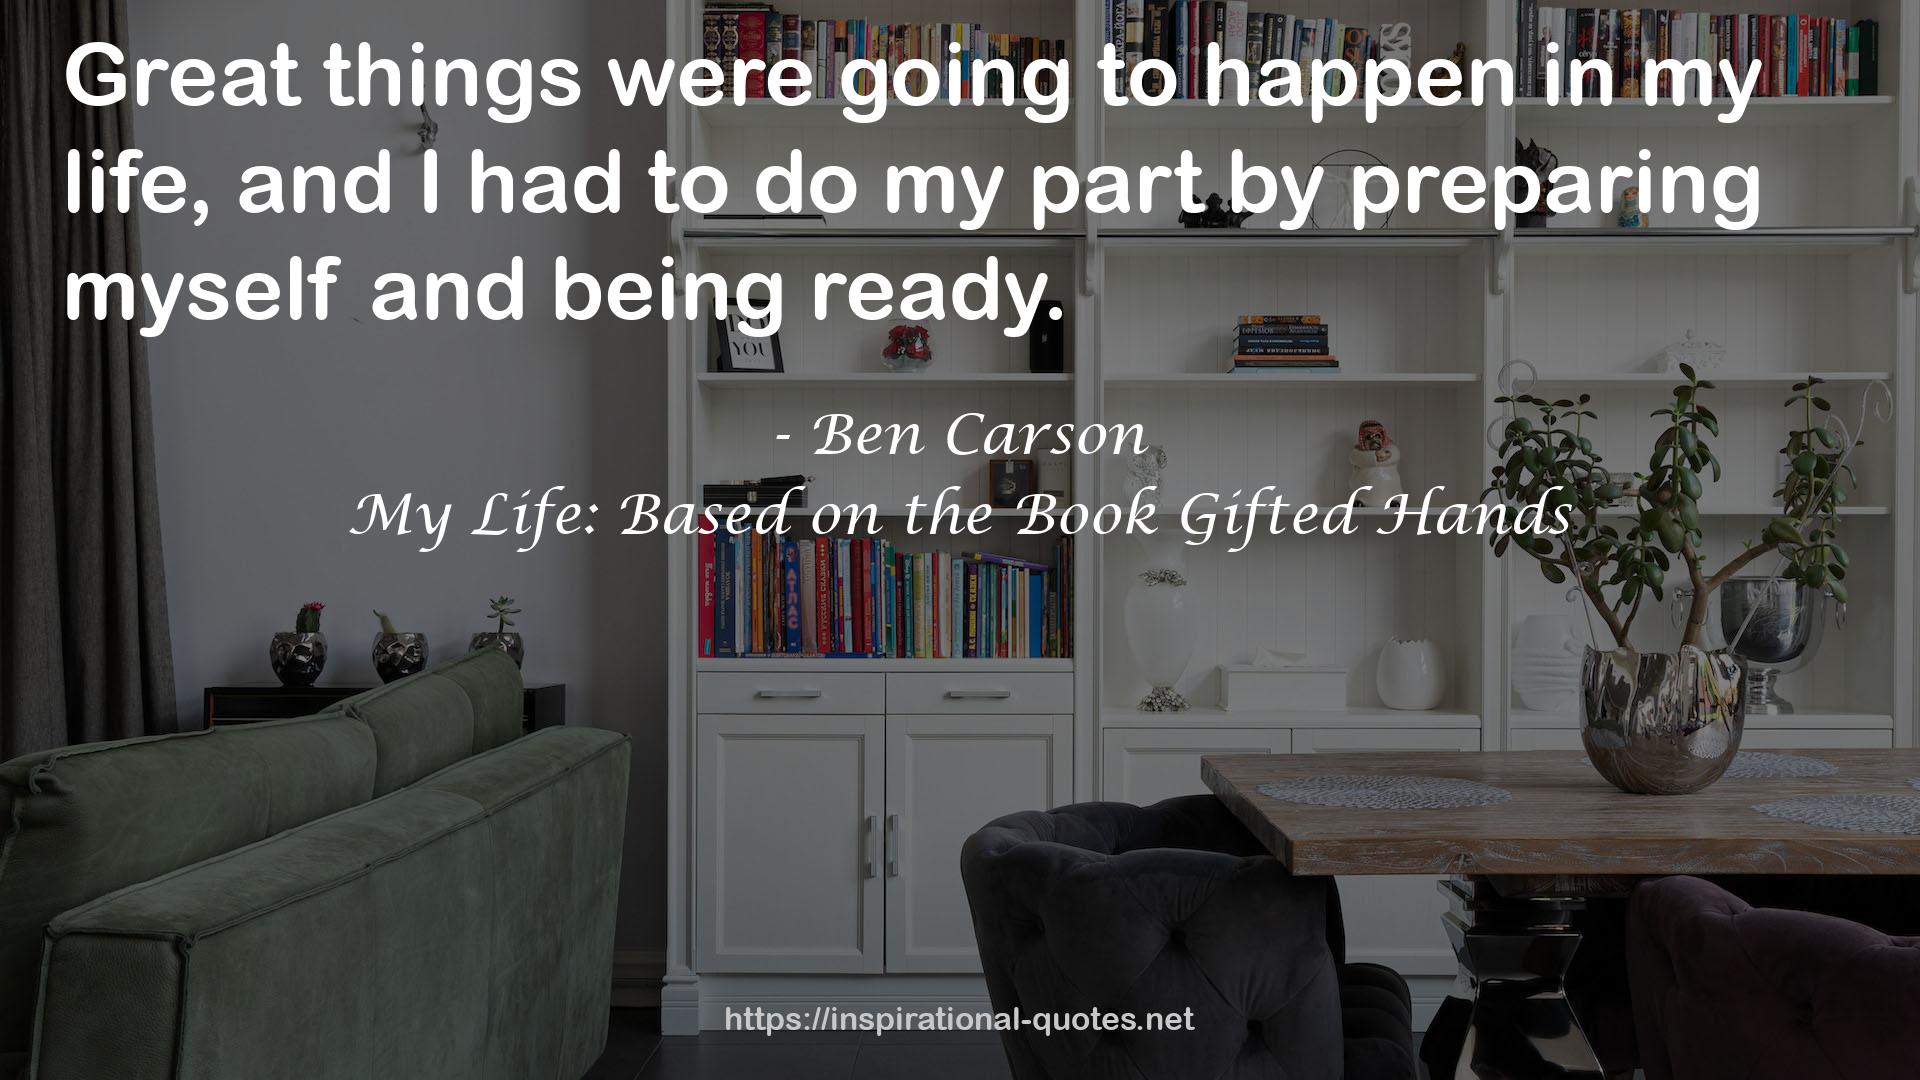 My Life: Based on the Book Gifted Hands QUOTES